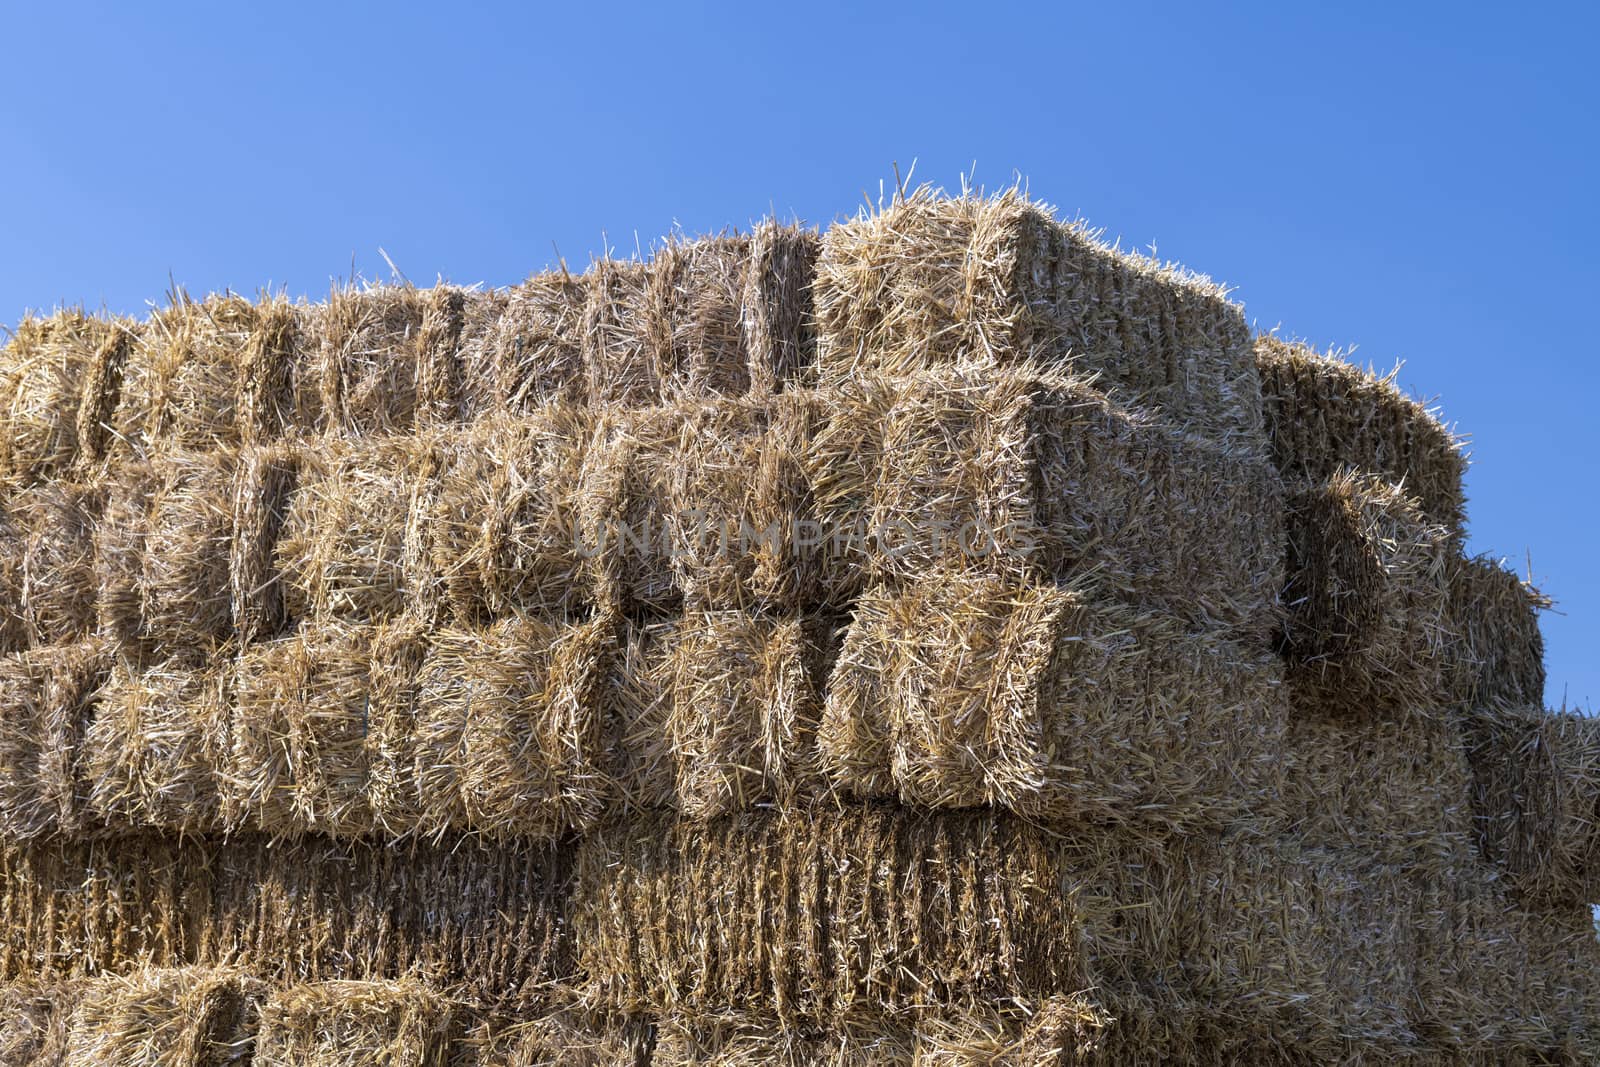 High stack of straw bales against a blue summer sky
